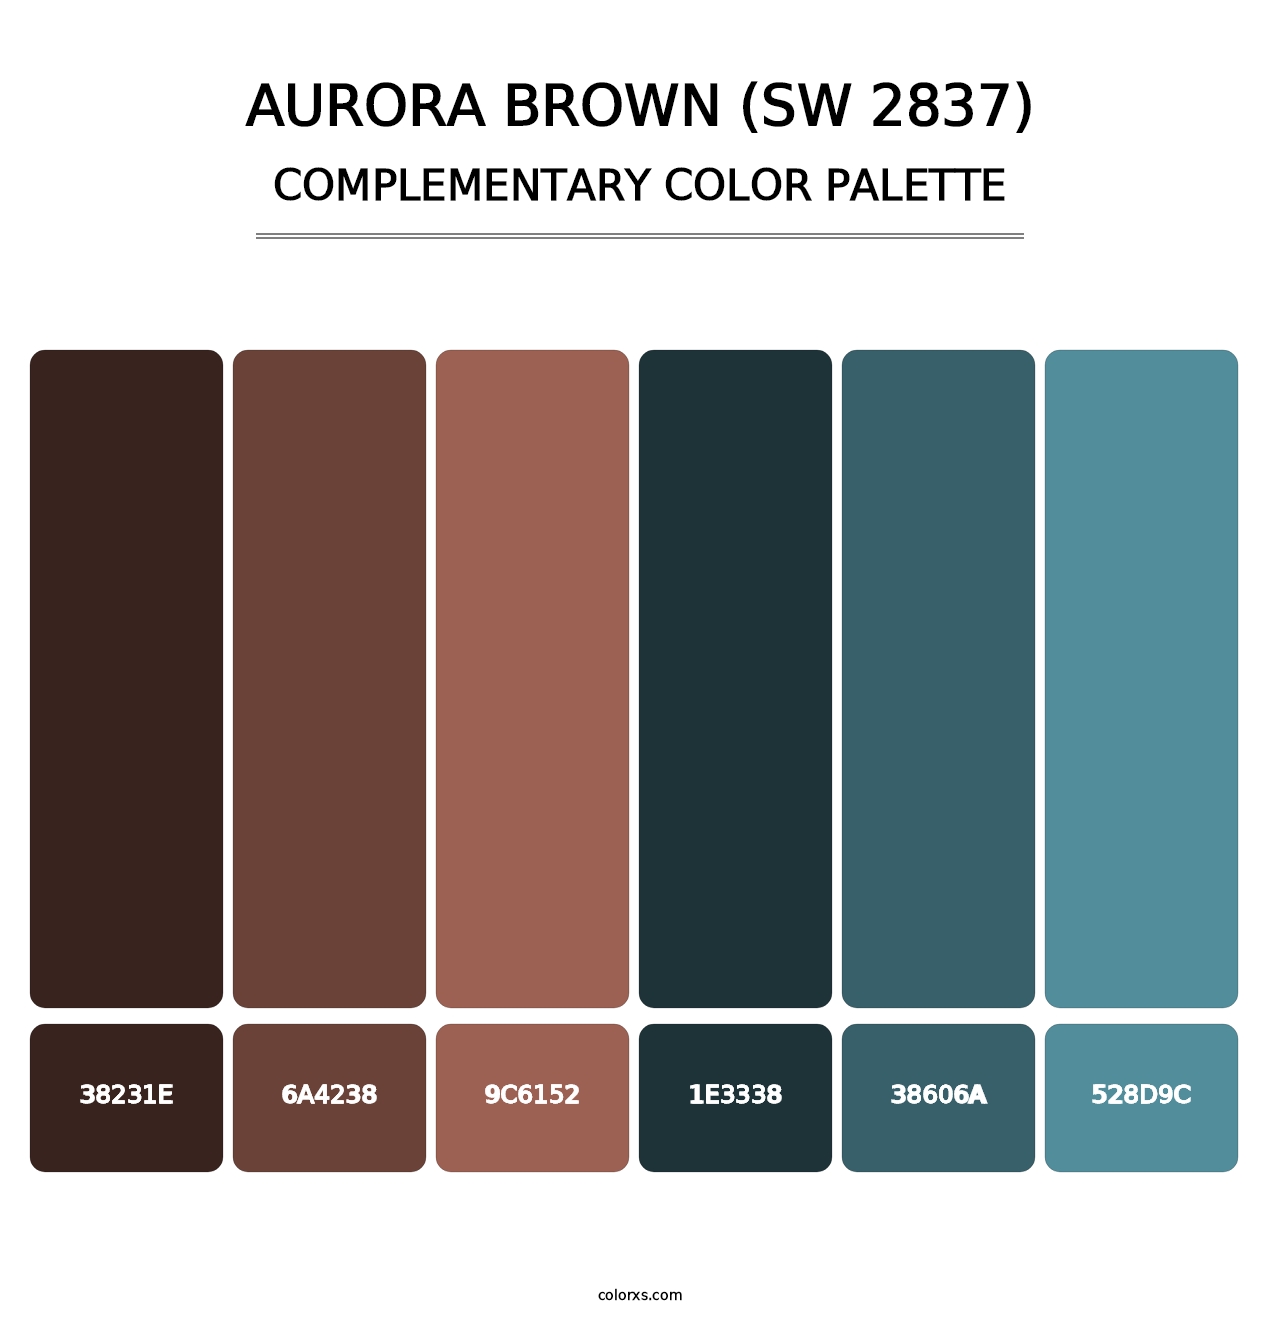 Aurora Brown (SW 2837) - Complementary Color Palette